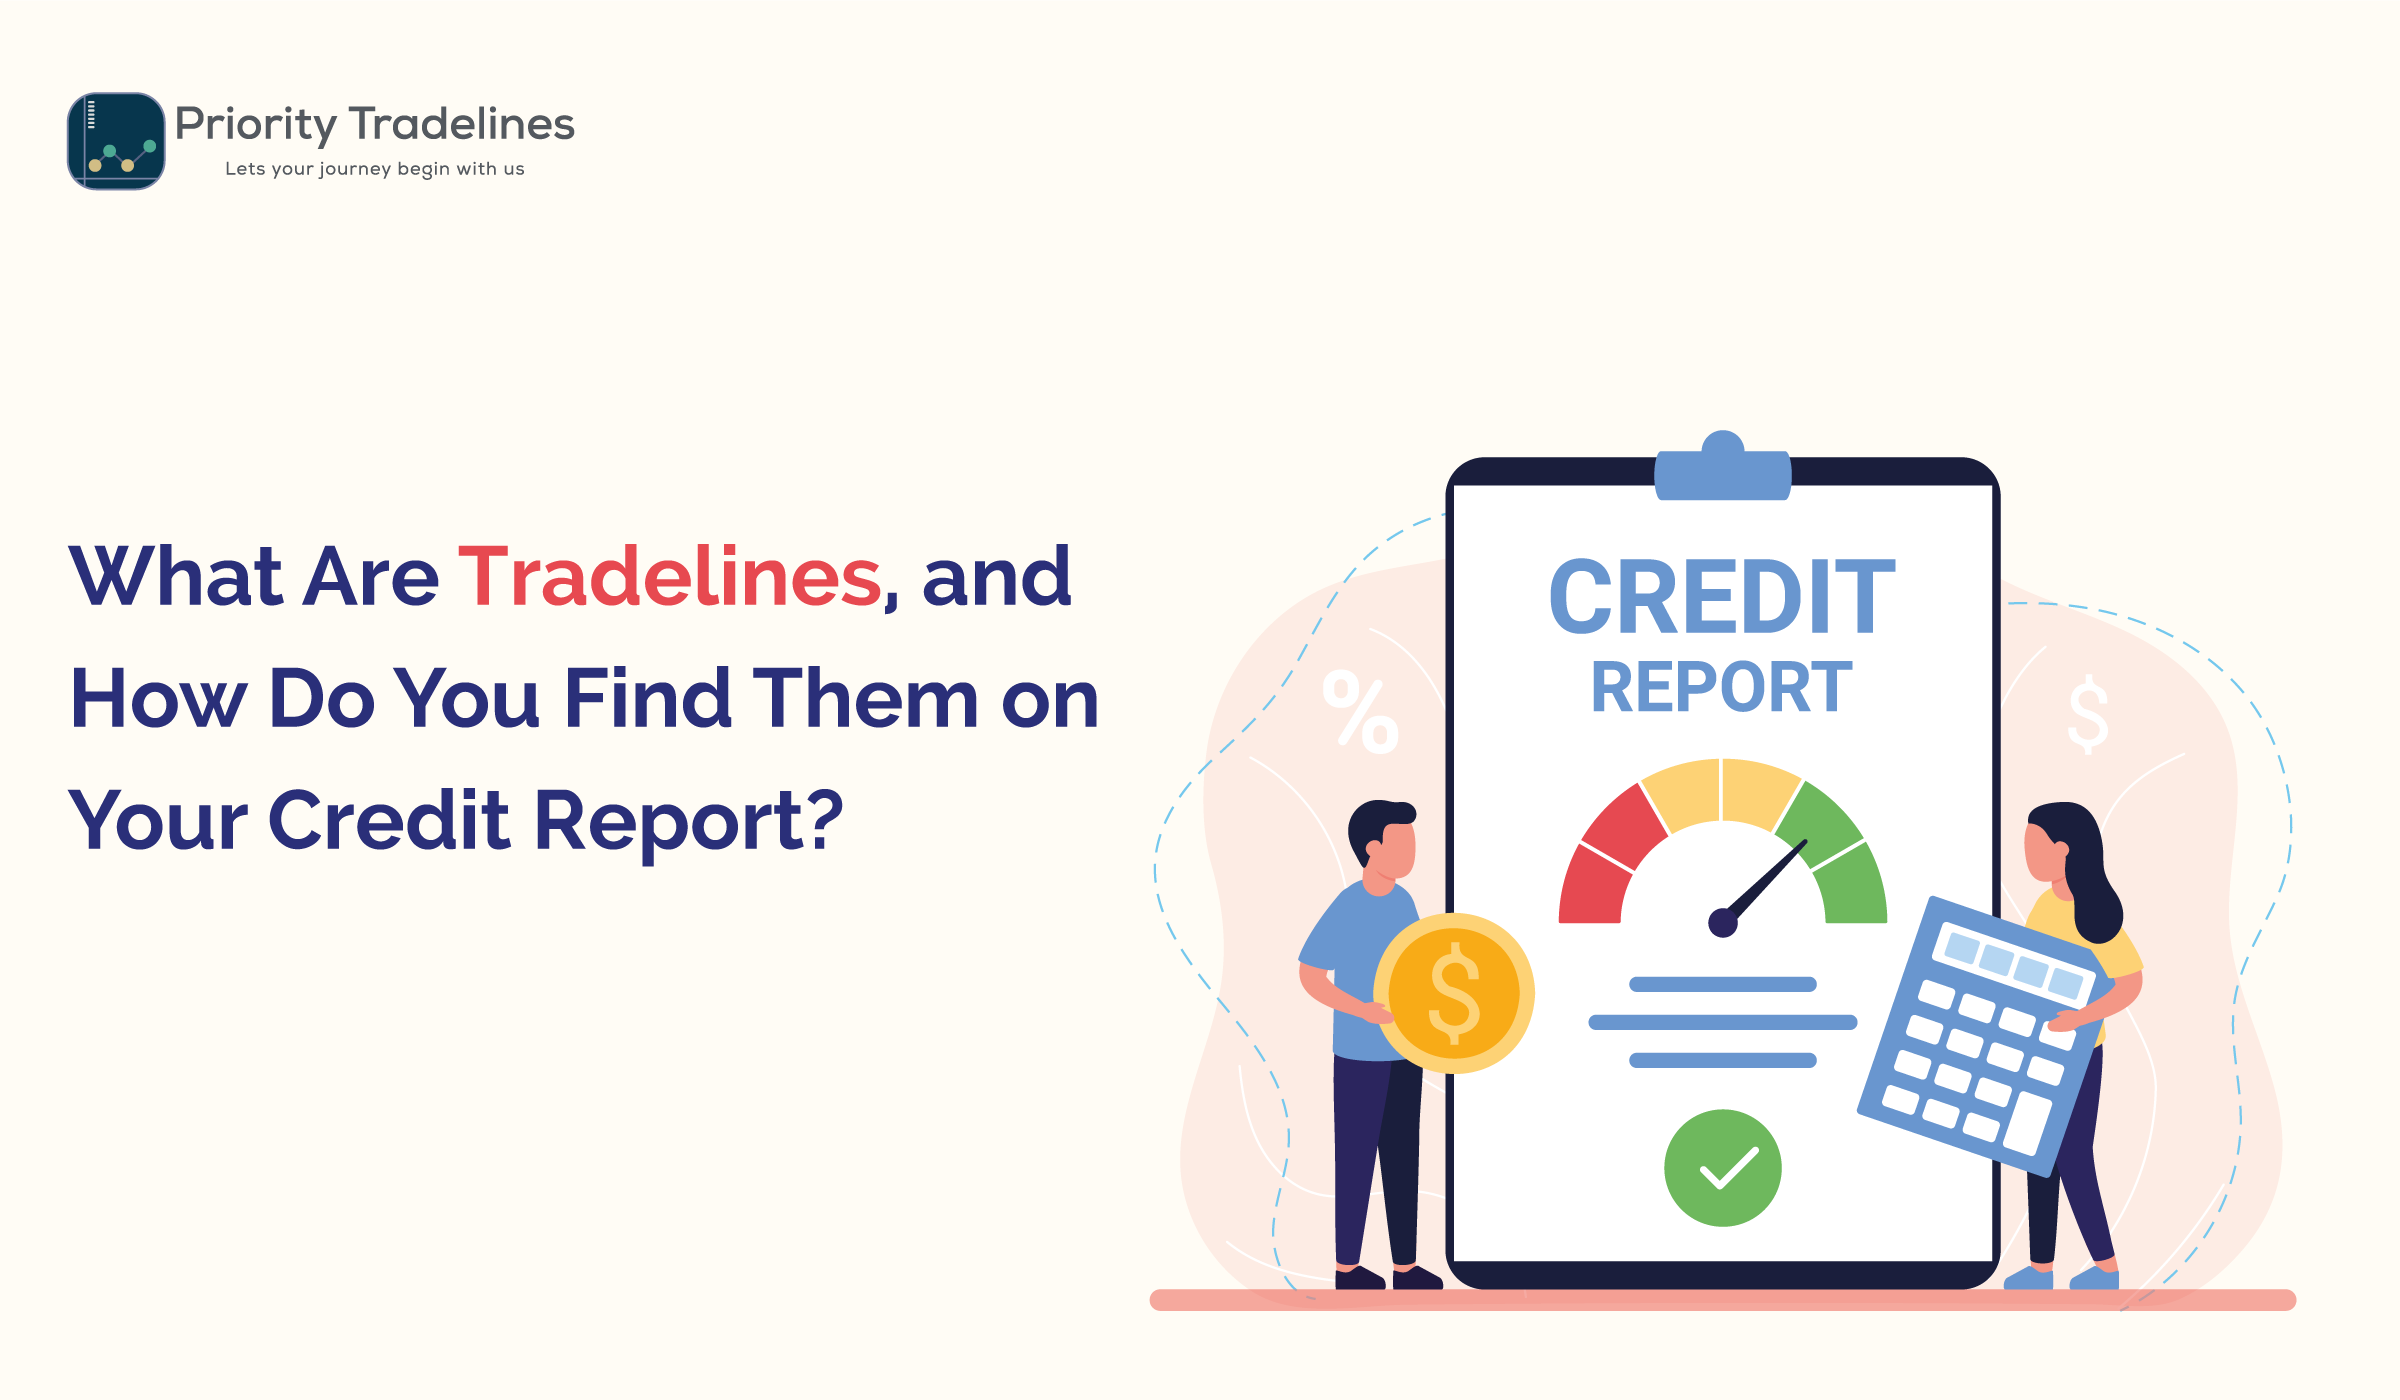 What Are Tradelines, and How Do You Find Them On Your Credit Report?